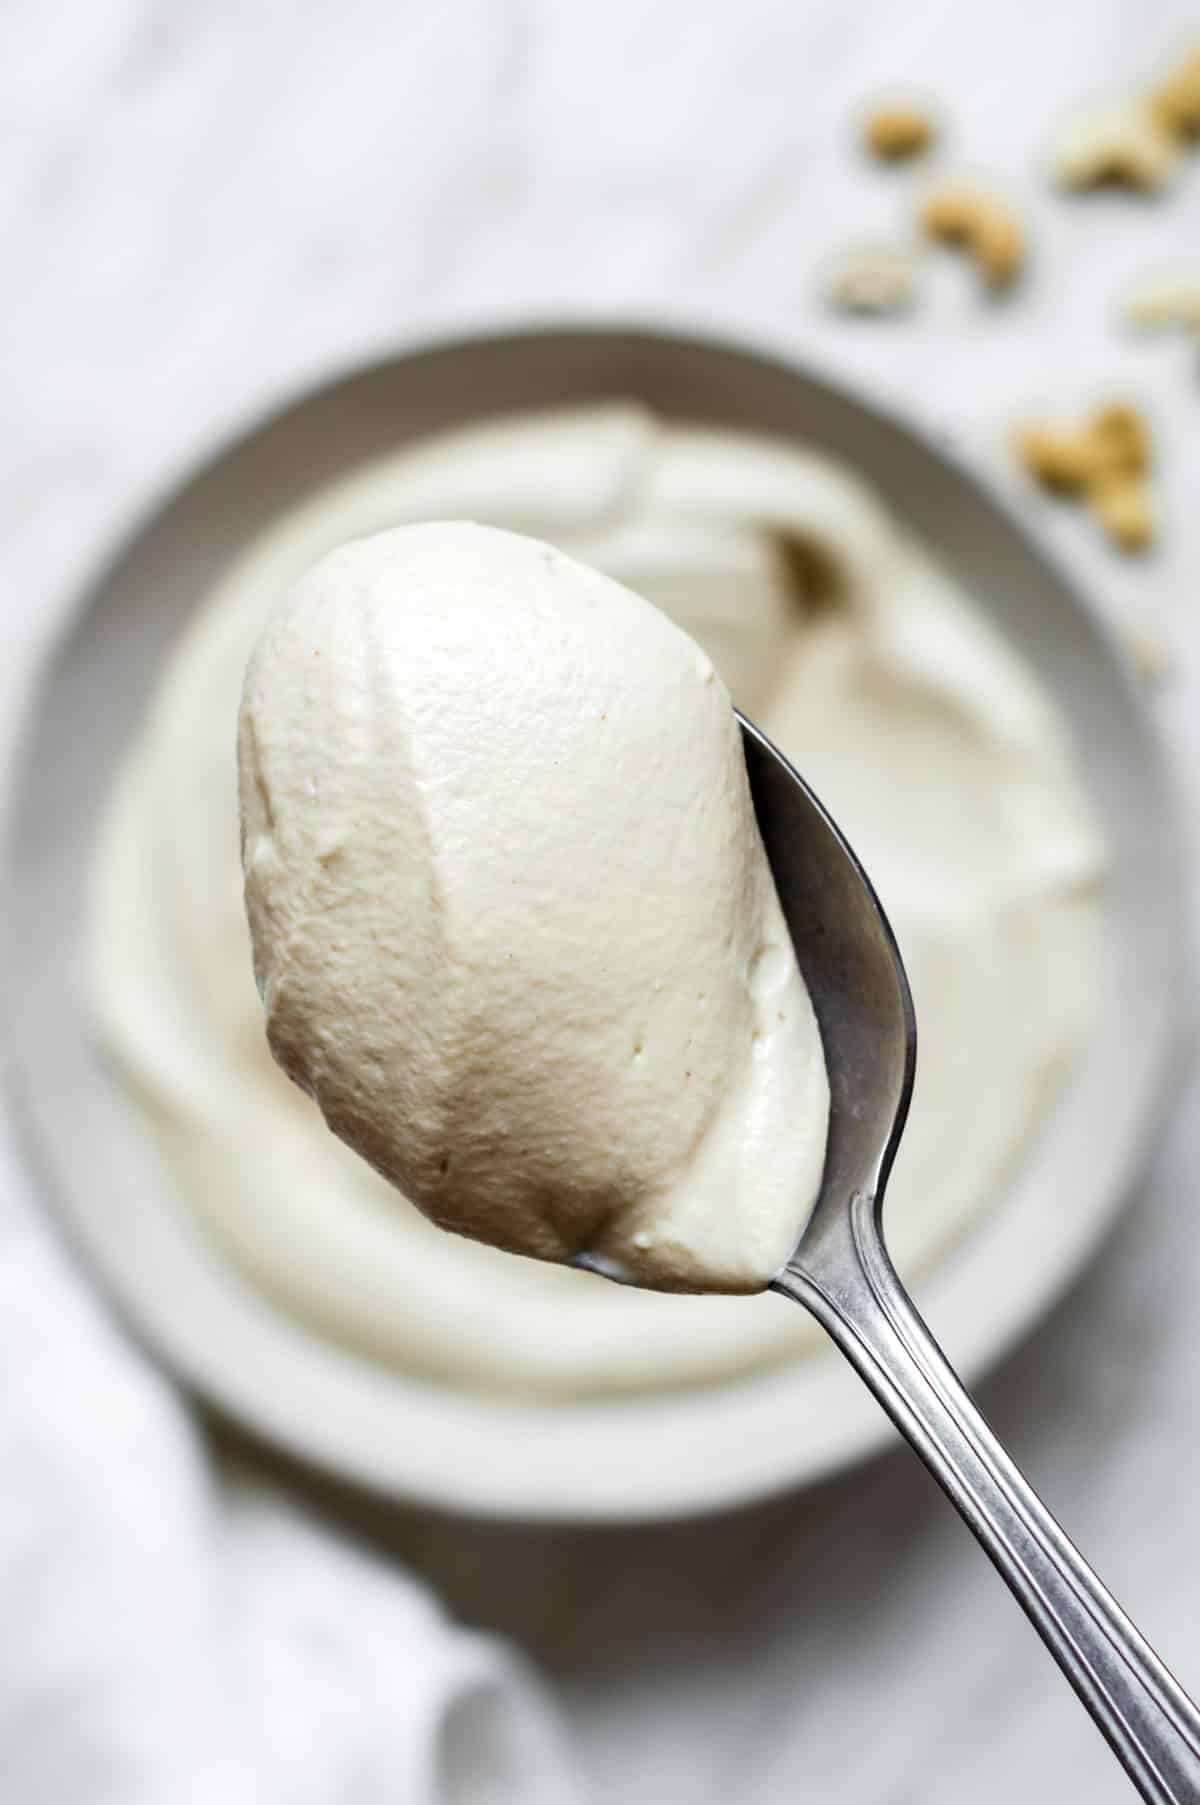 A close-up shot of a spoon full of vegan mascarpone cheese.